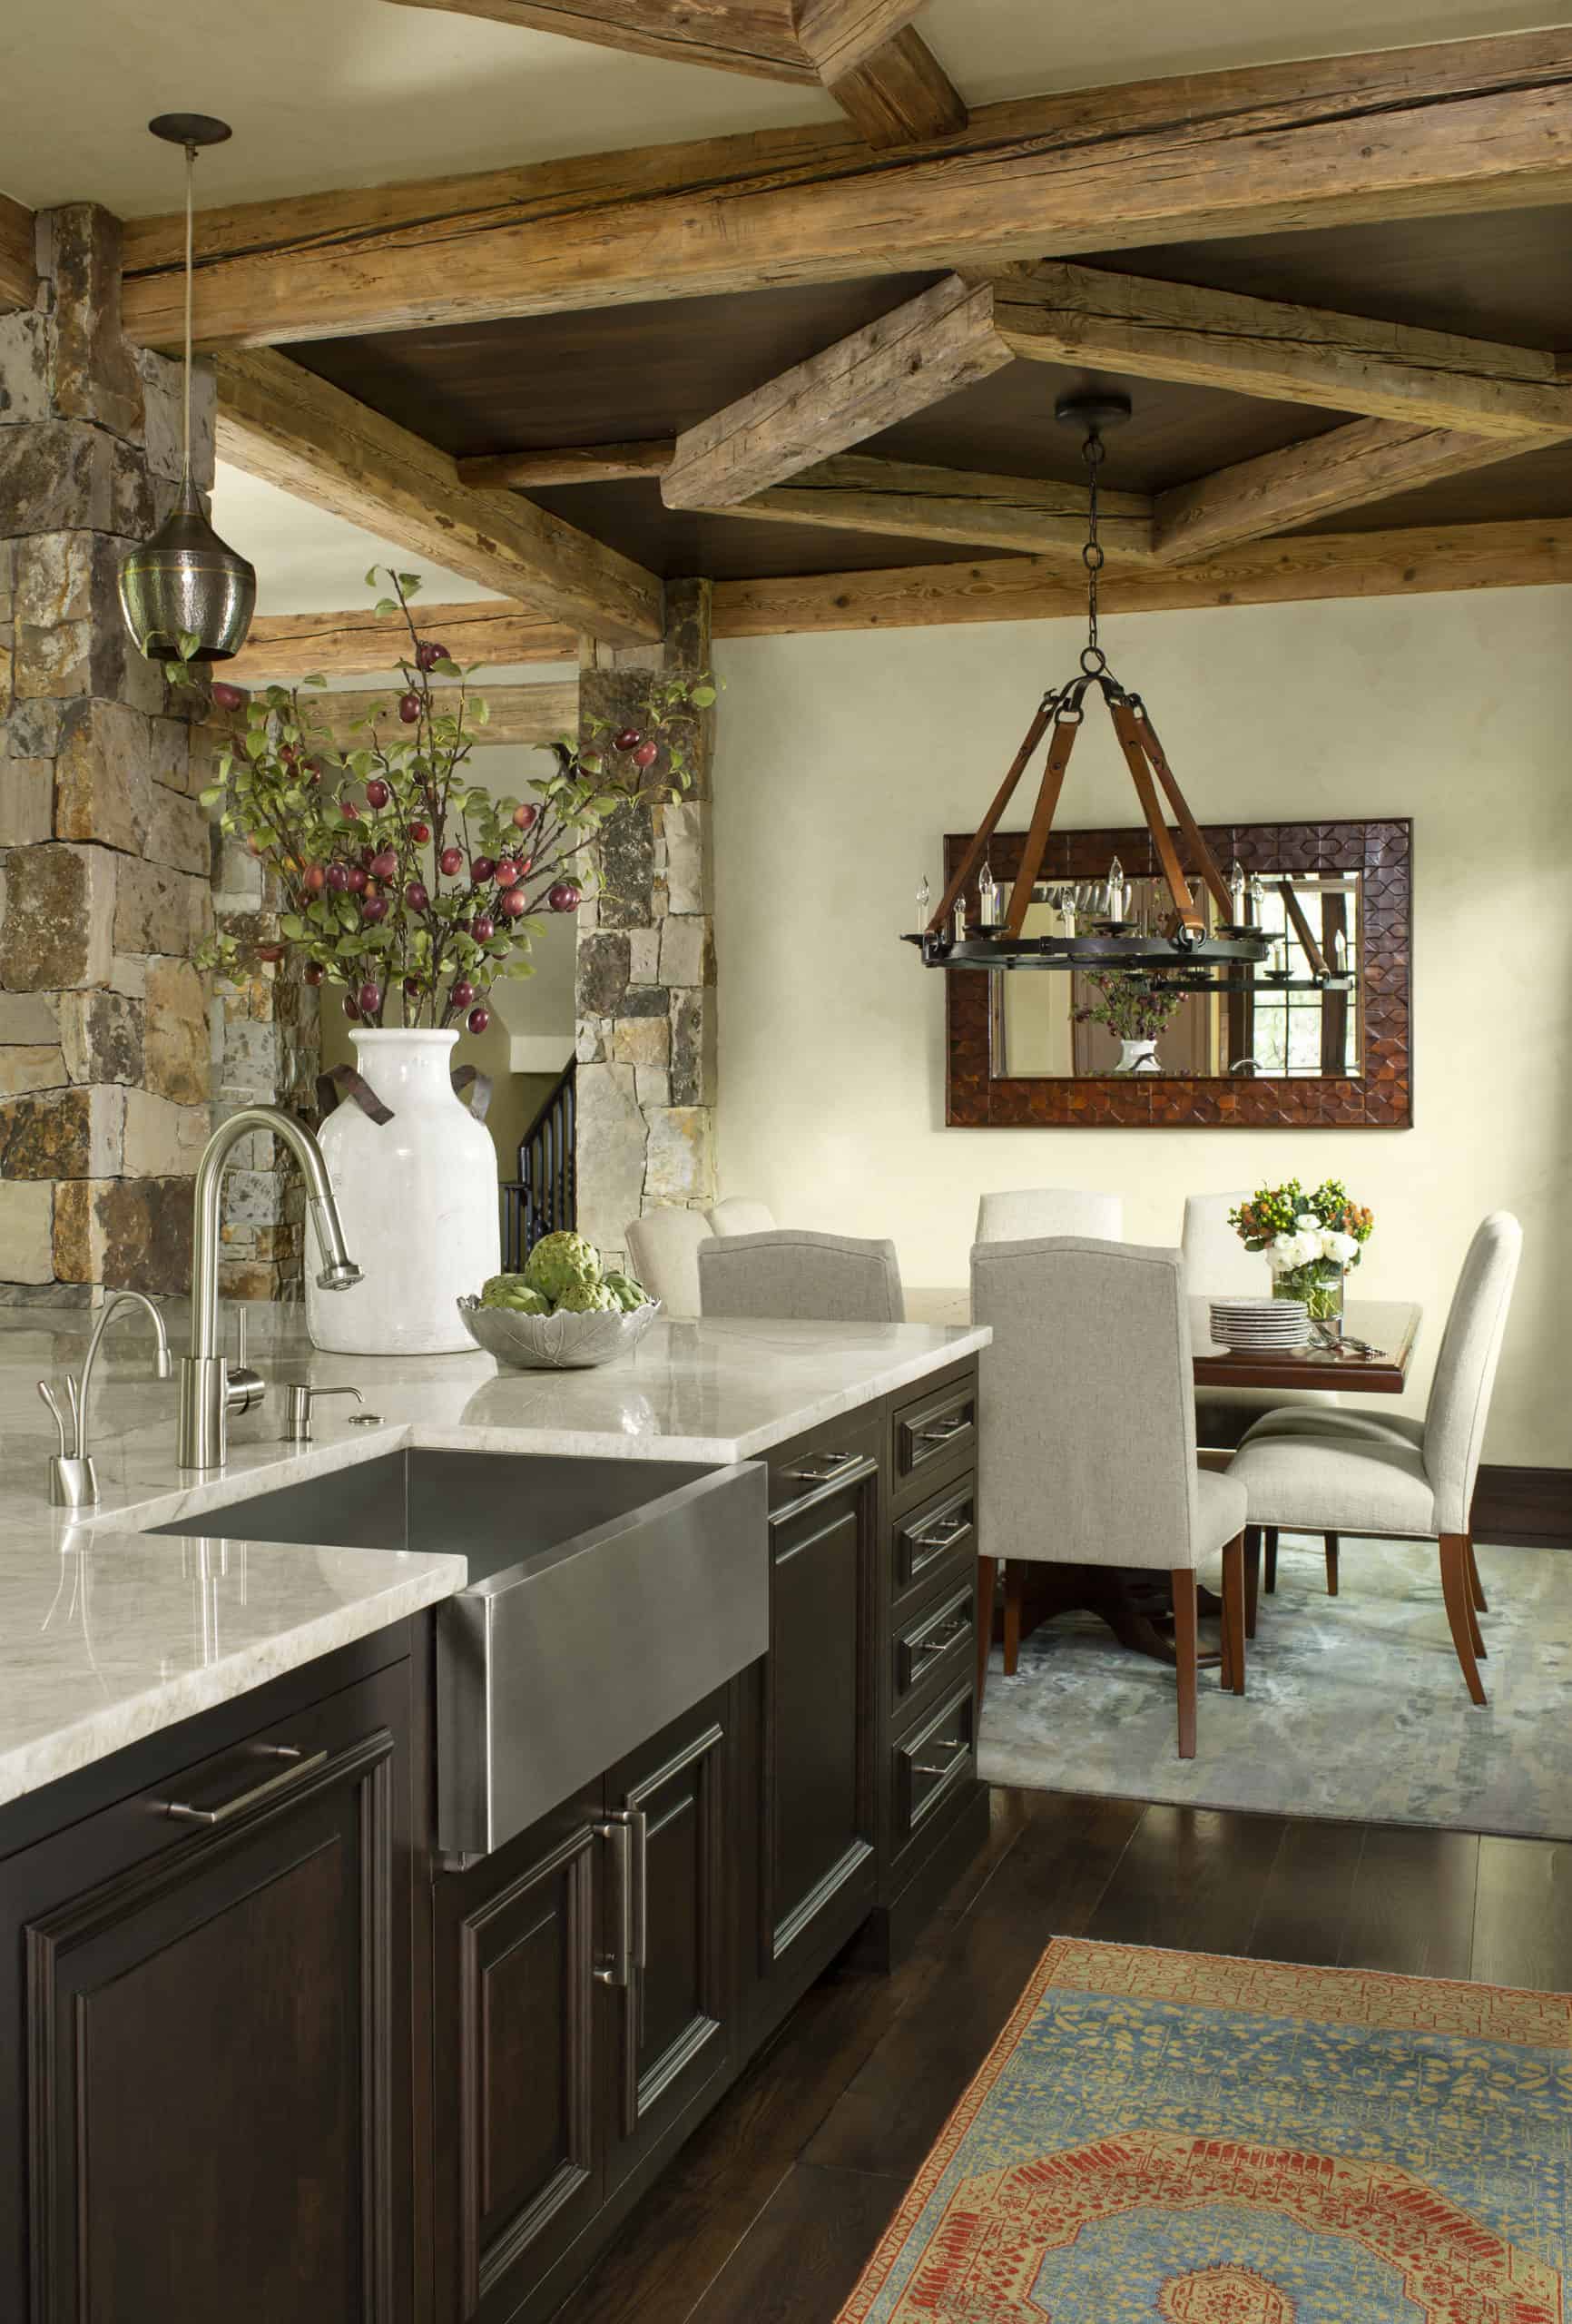 Rustic Vail home interiors with modern kitchen